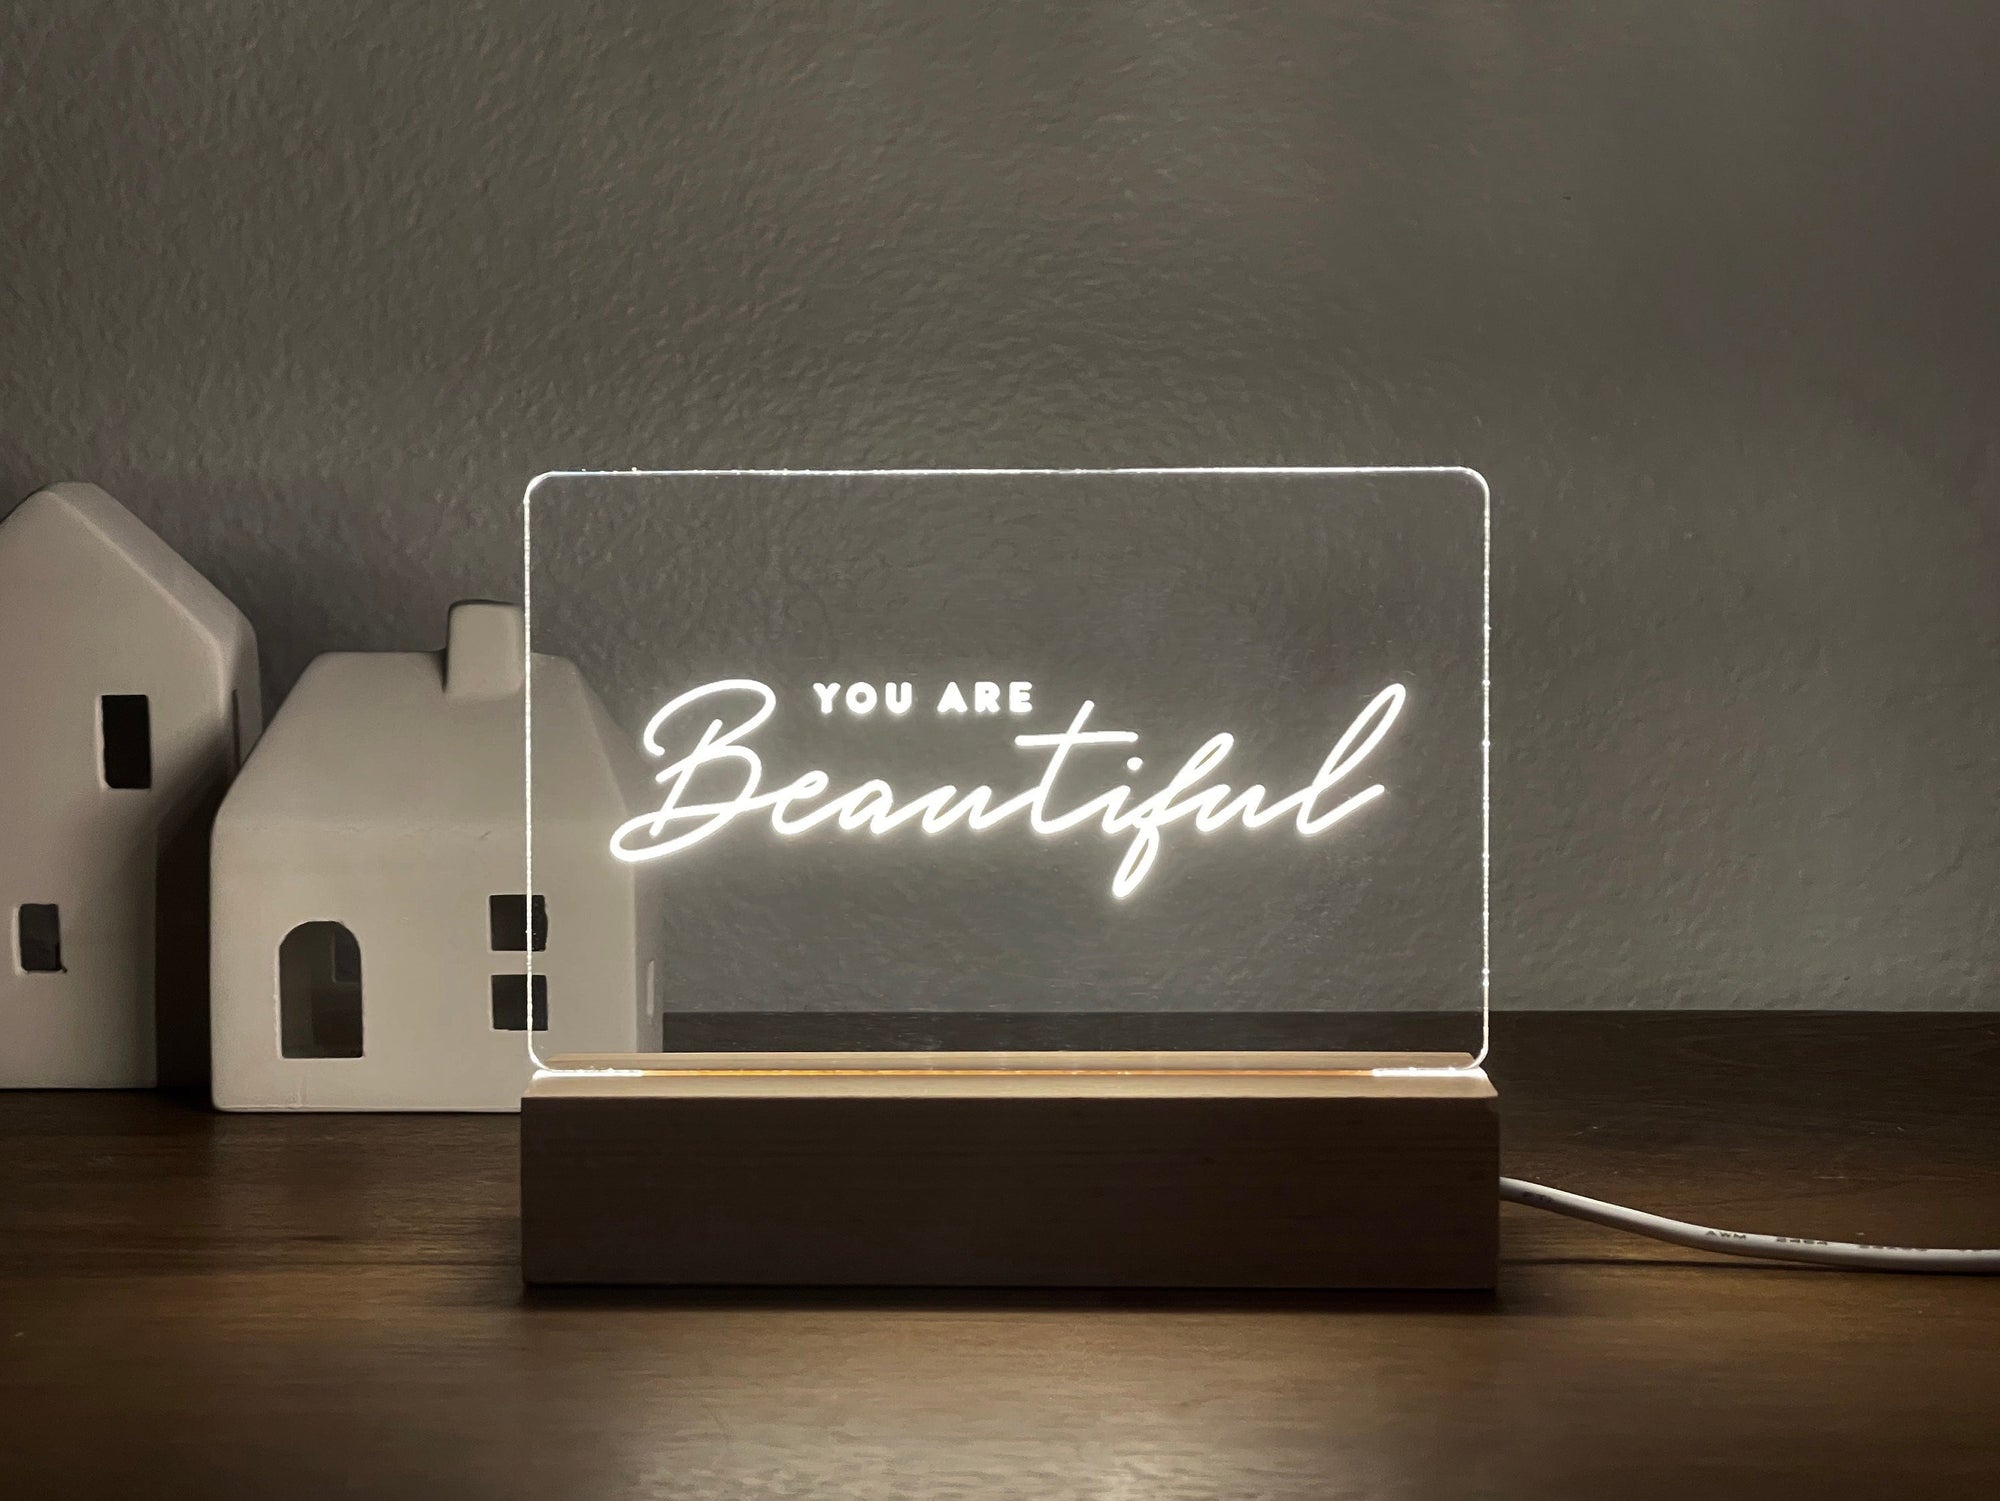 You're Beautiful Led Night Light - Bible Verse Led Light - New Home Gift - Gift For Christian